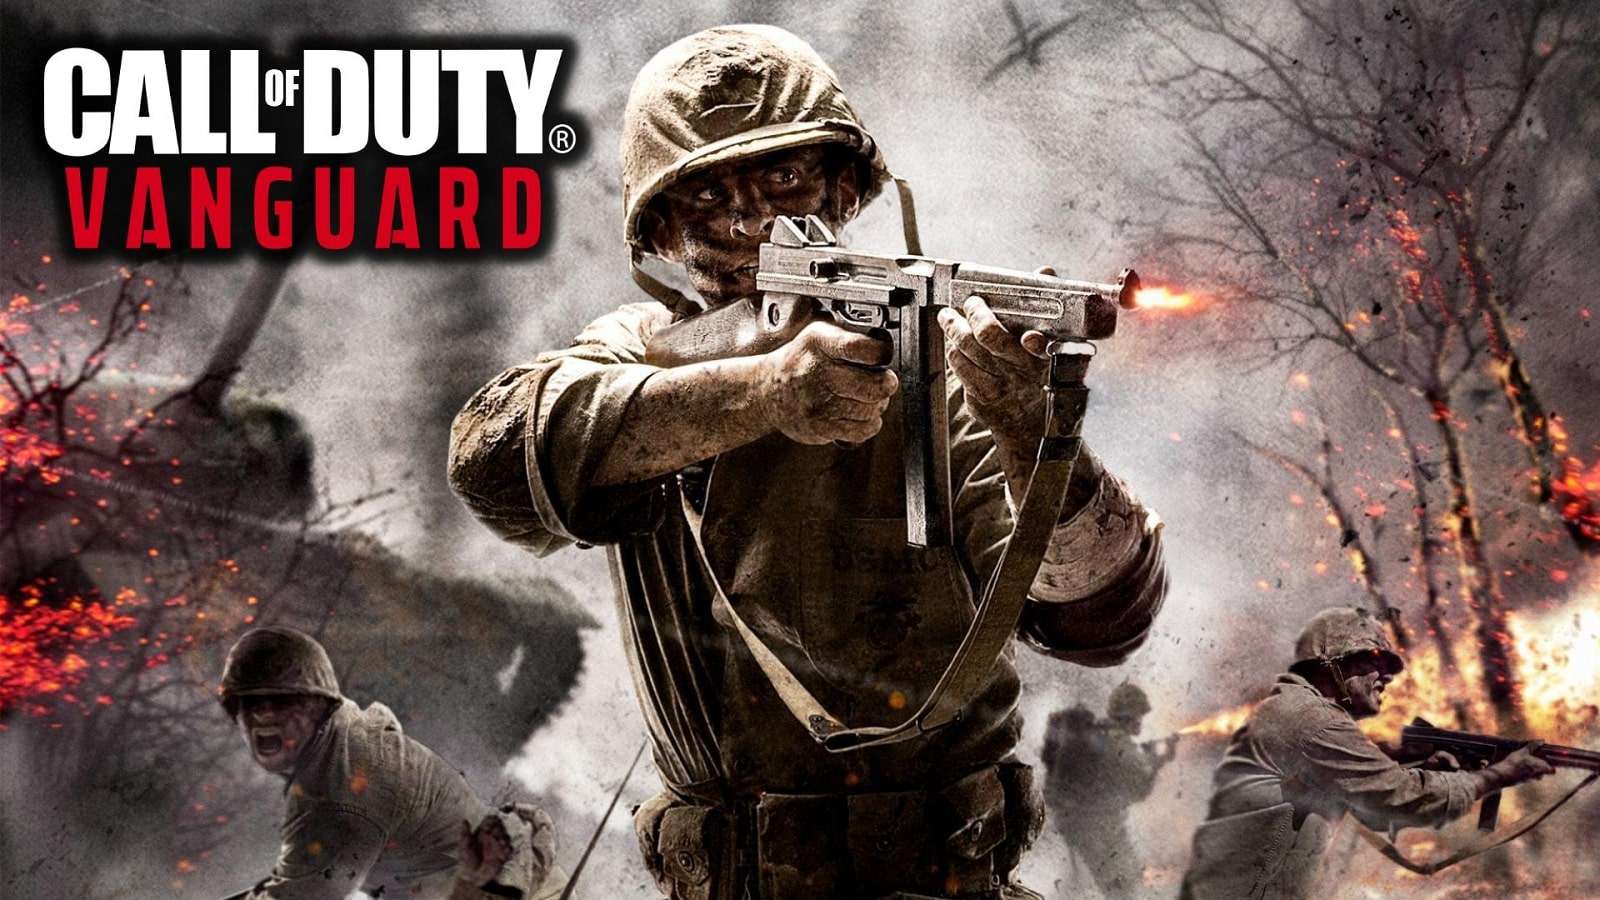 CoD World at War US soldier firing a Thompson SMG